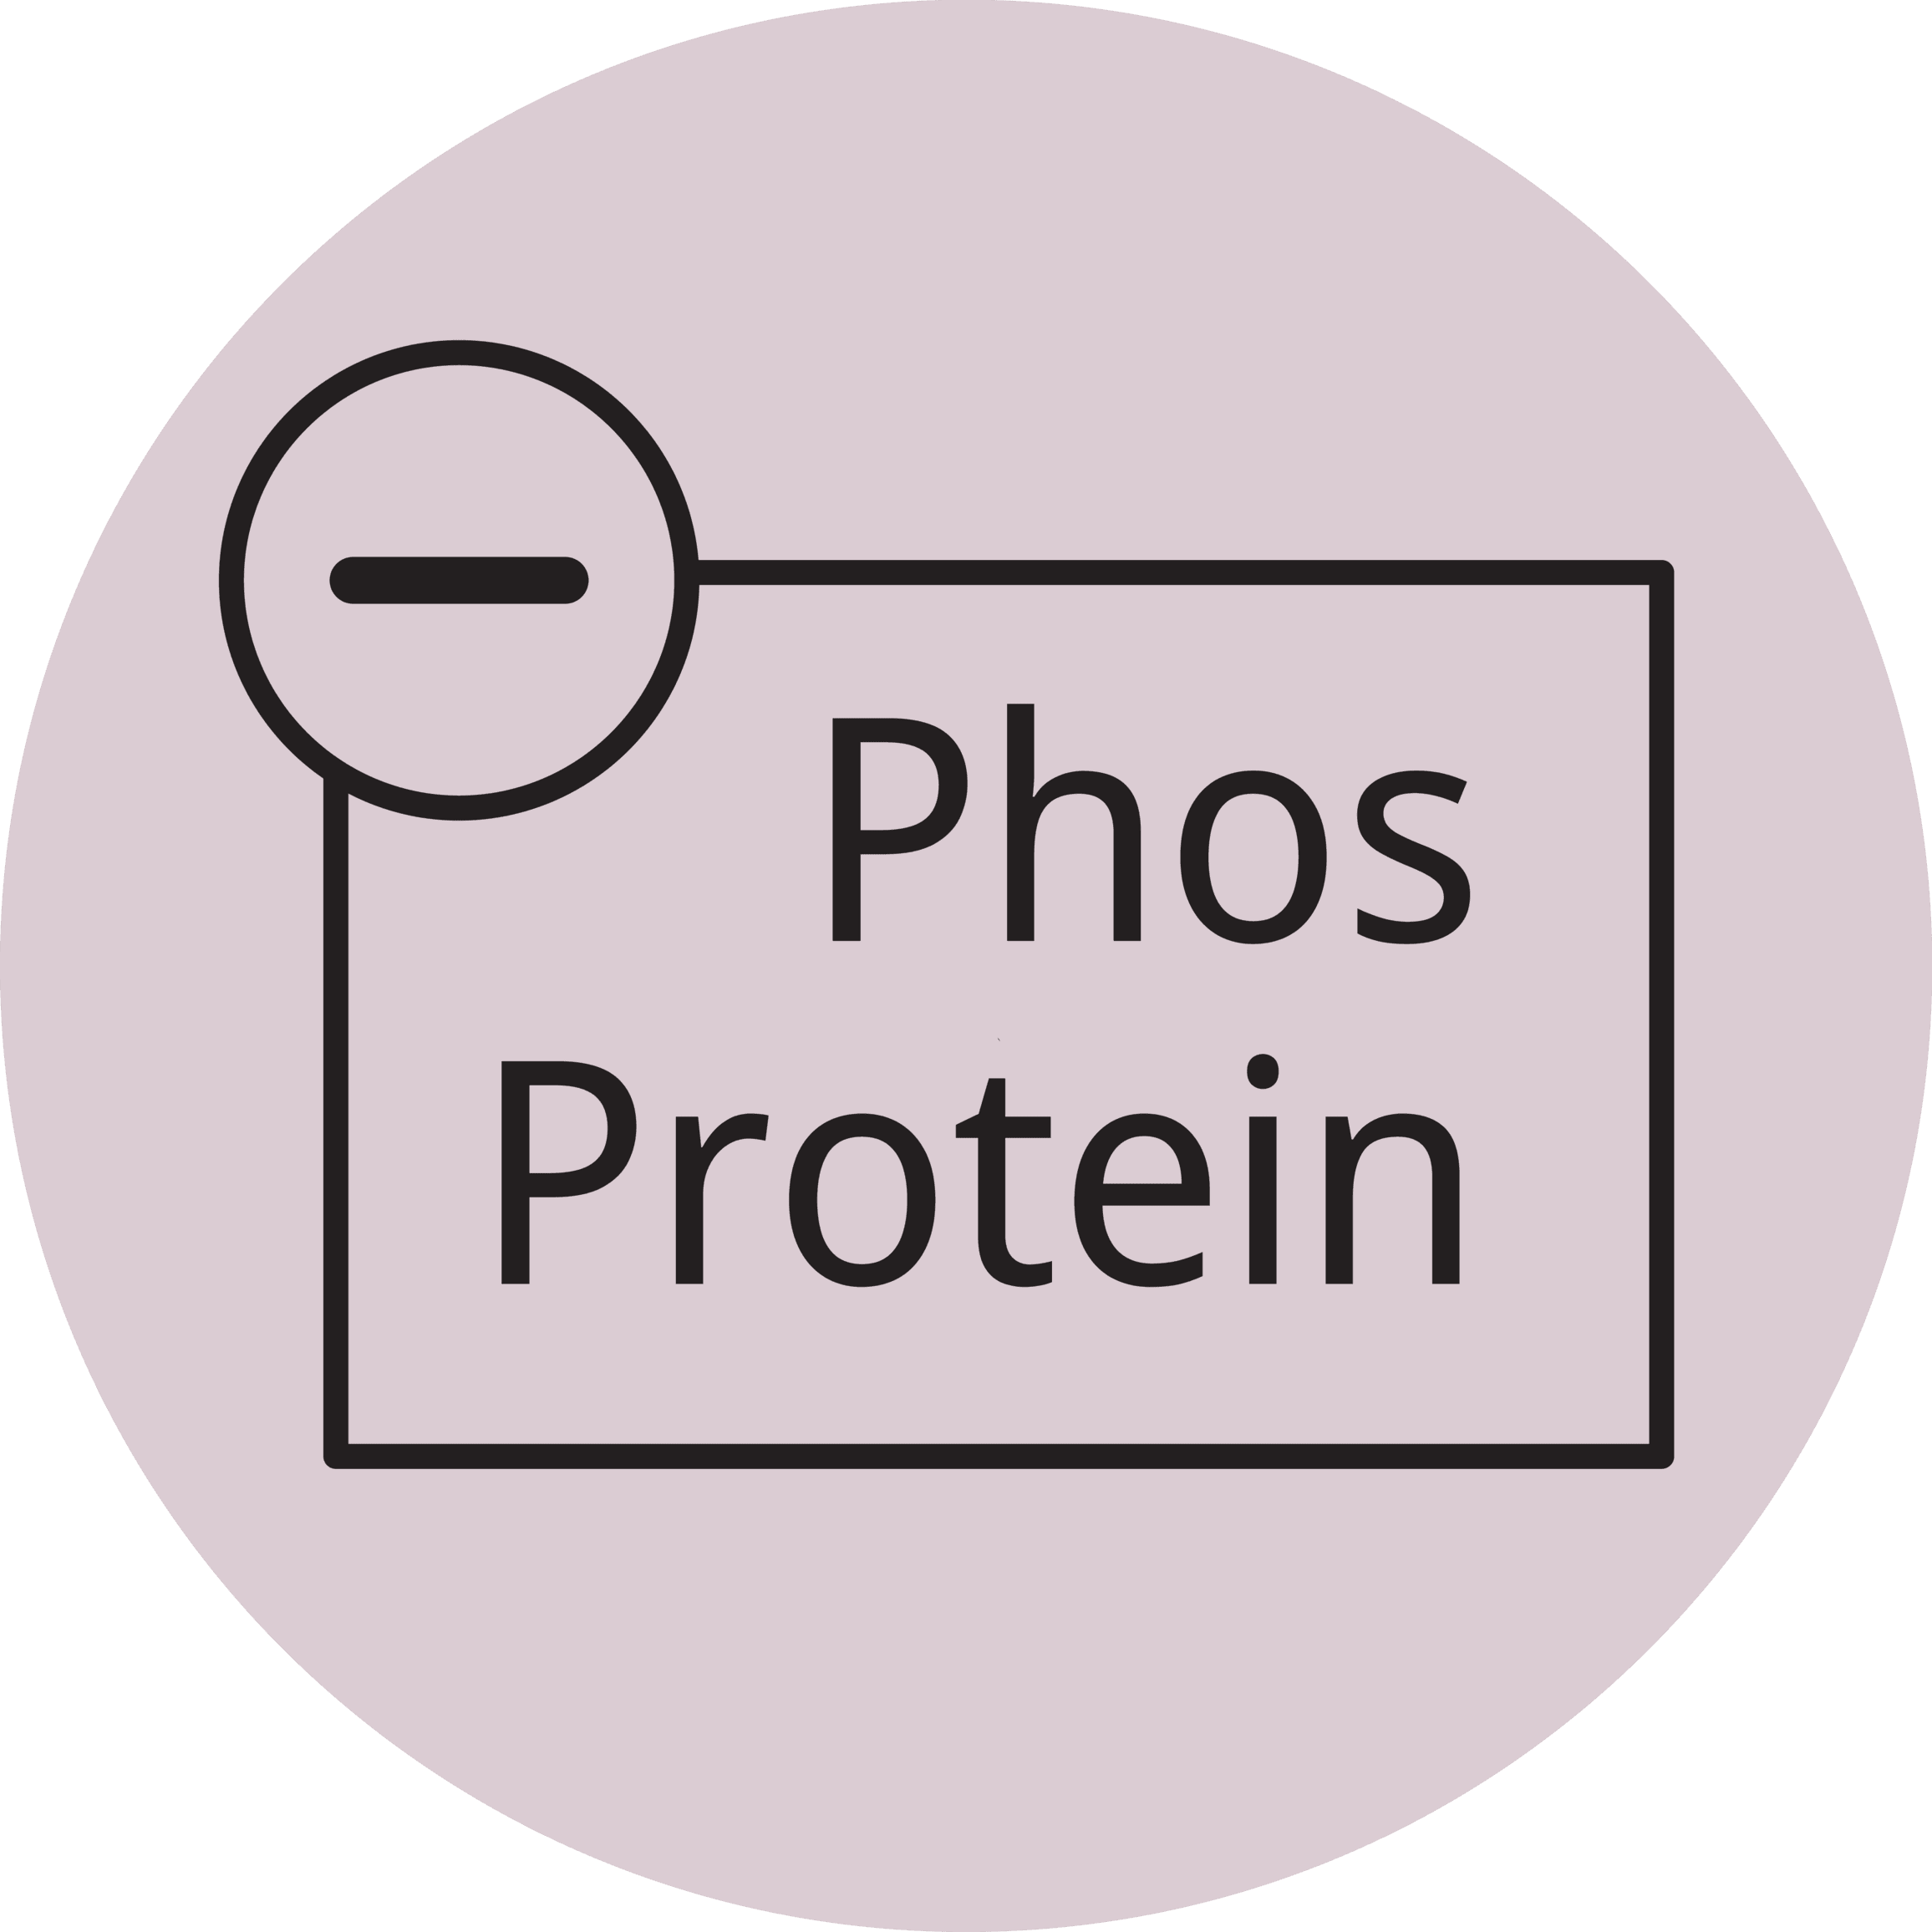 Reduced protein and phosphorus content